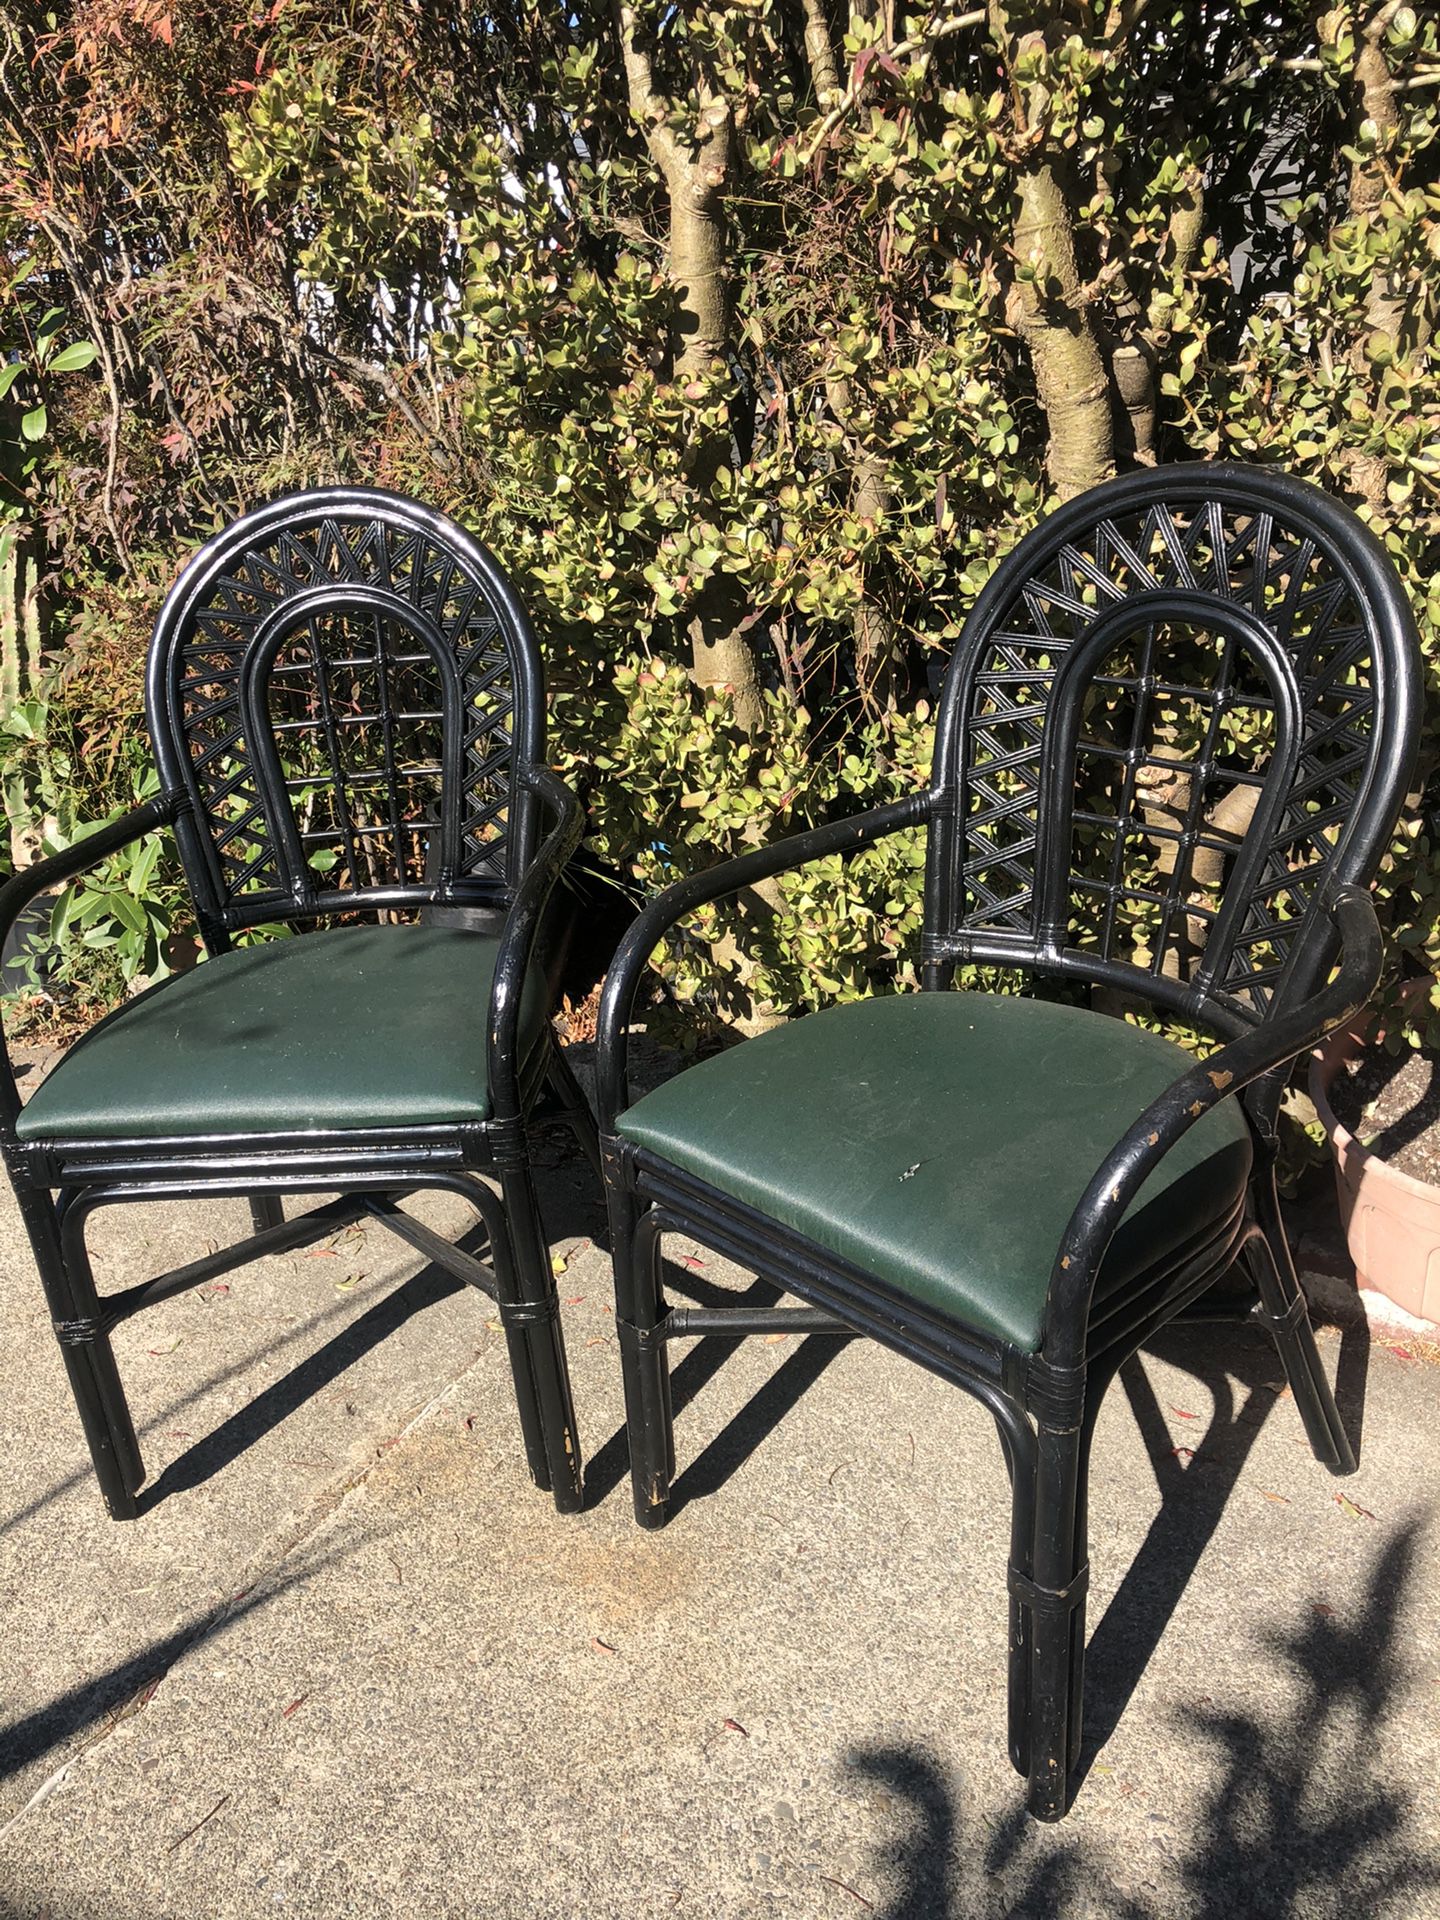 2 rattan chairs from Philippines